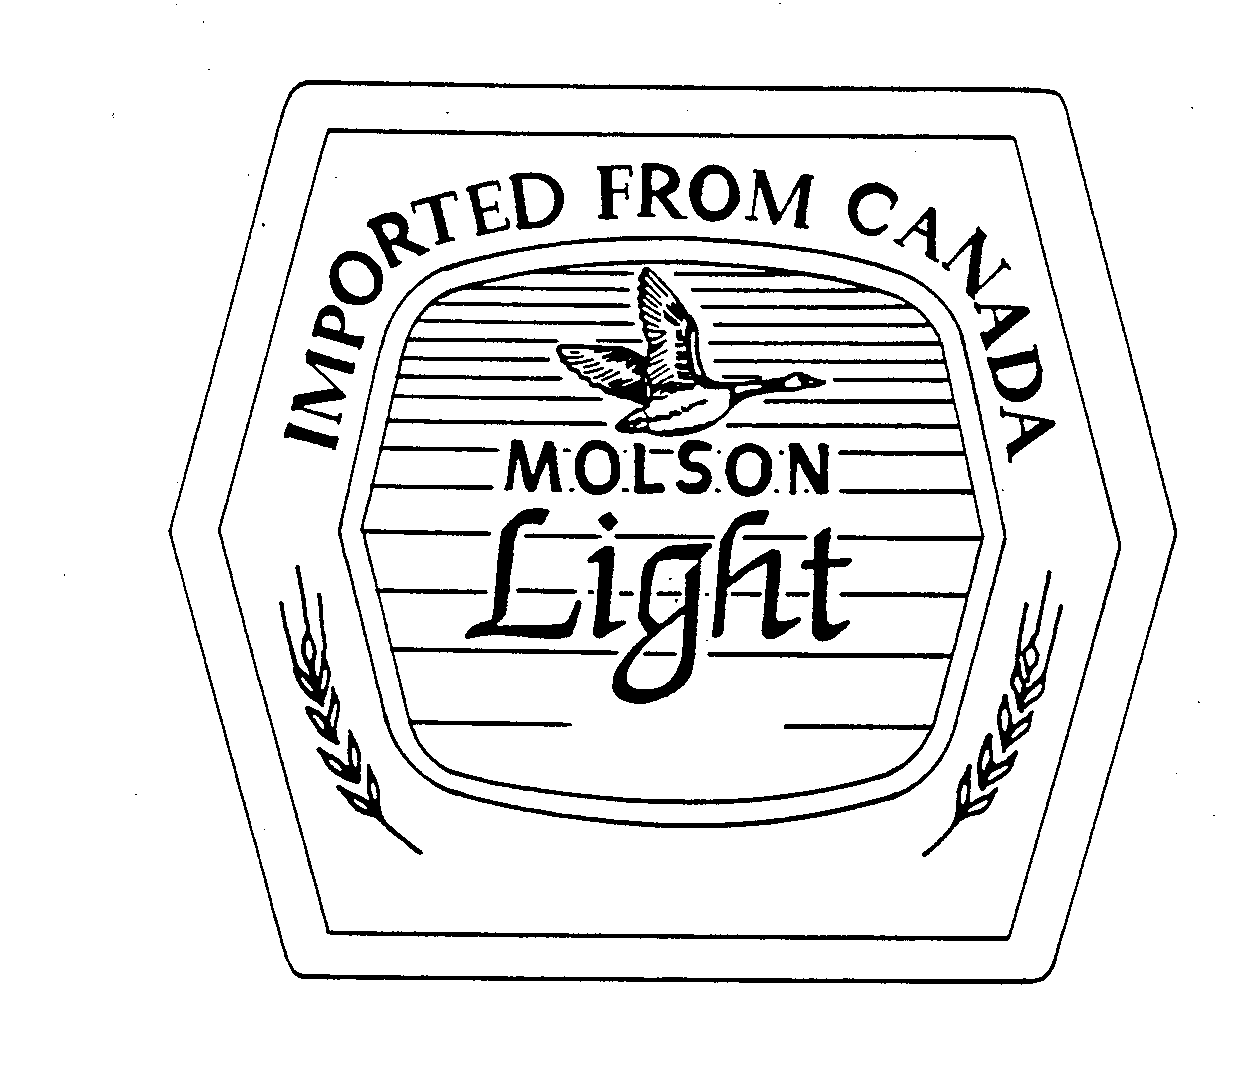  MOLSON LIGHT IMPORTED FROM CANADA